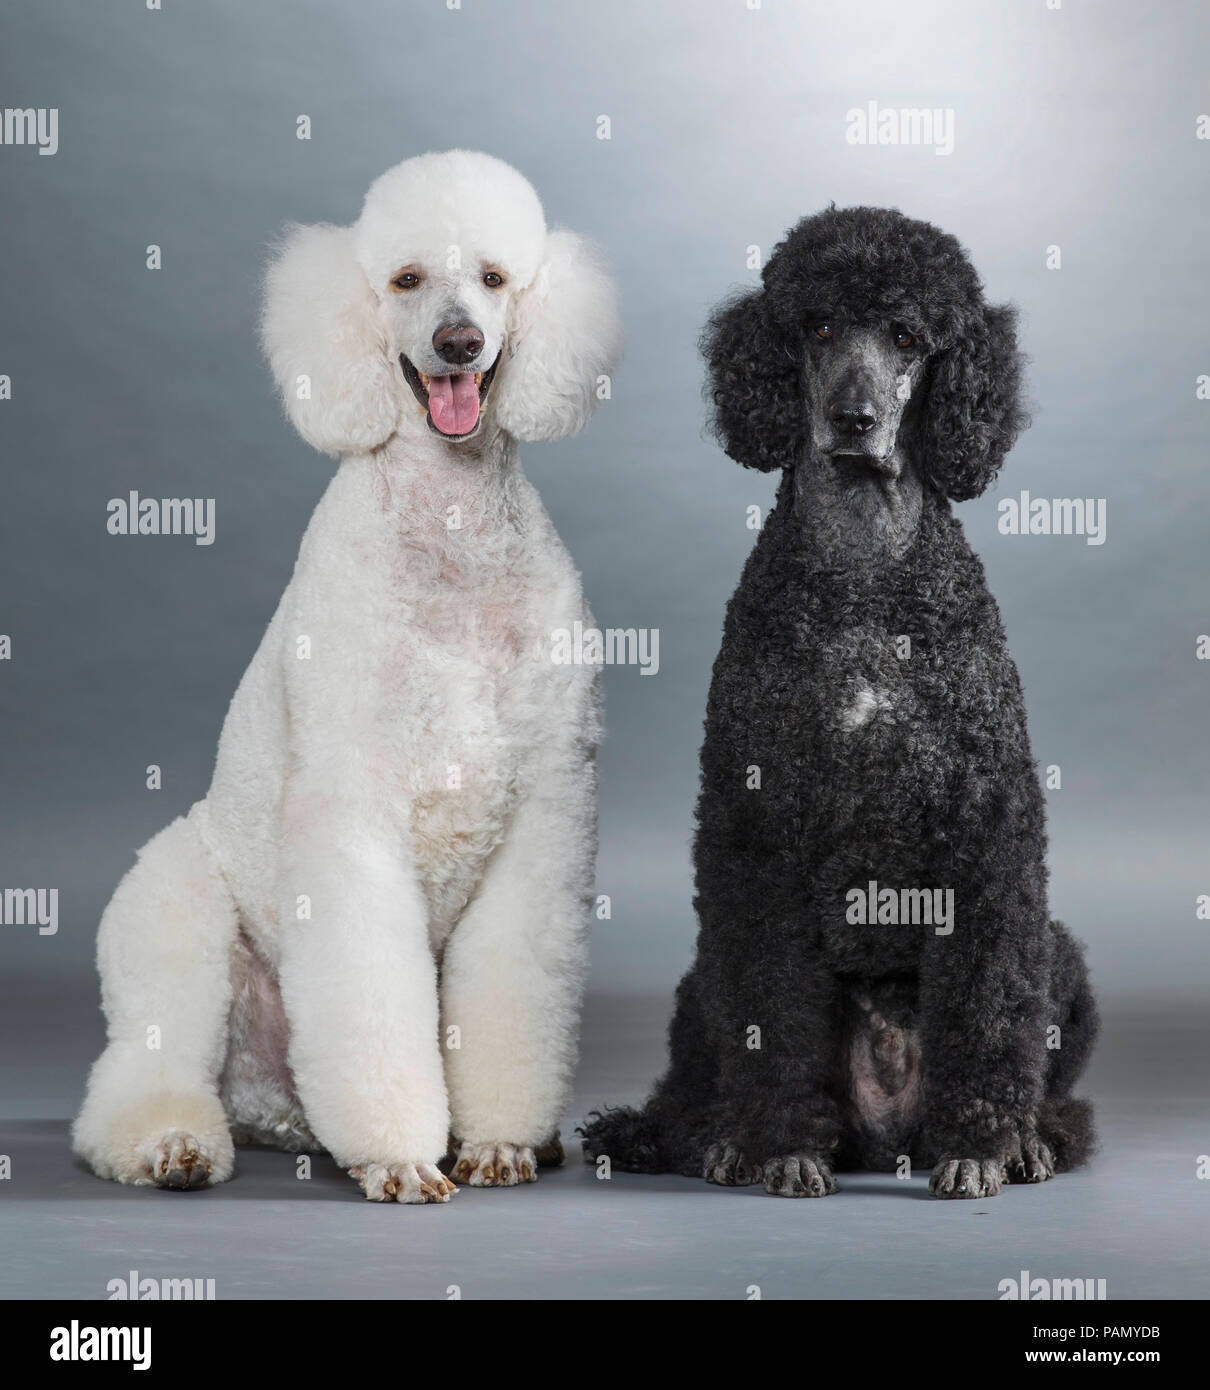 Standard Poodle. Black and white adults sitting next to each other. Germany. Studio picture against agray background. Stock Photo